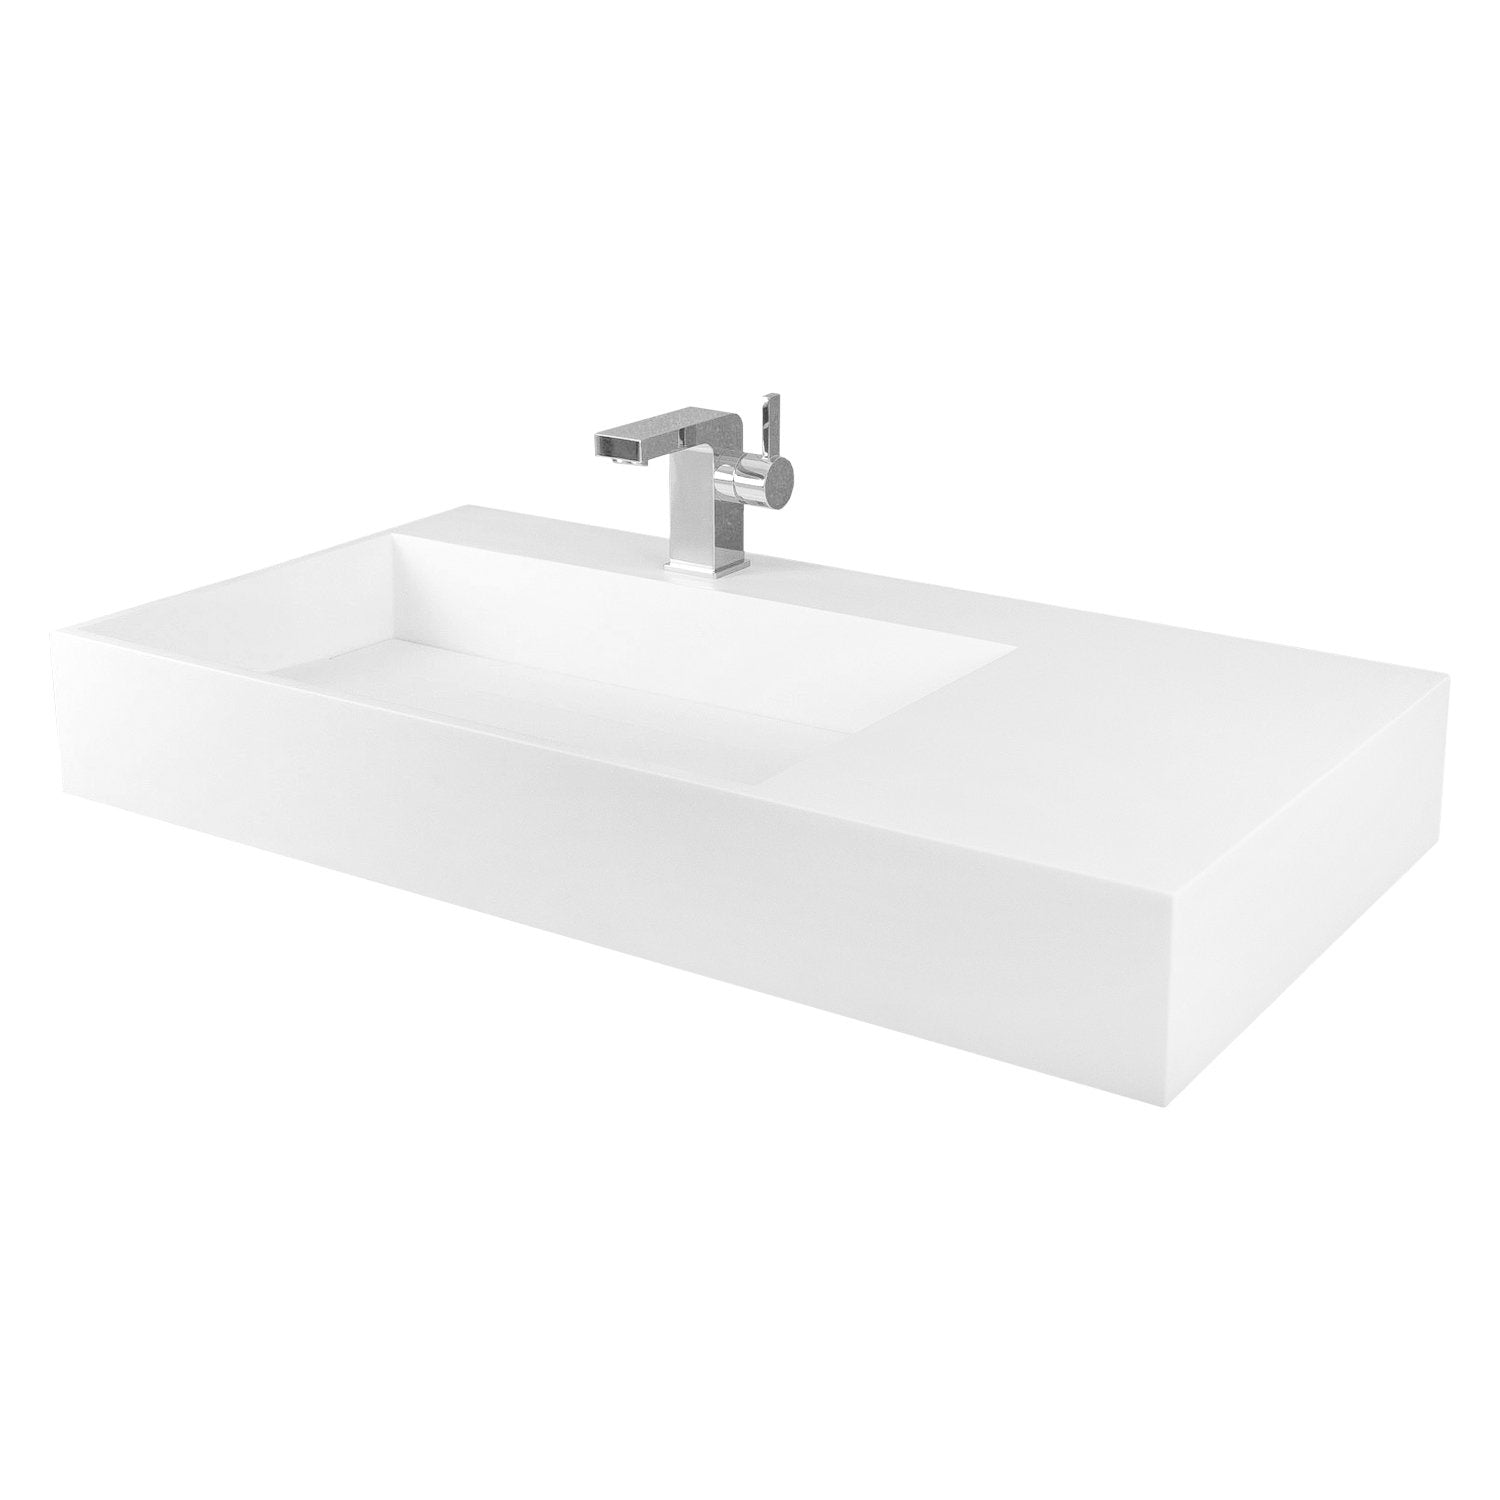 DAX Solid Surface Rectangle Single Bowl Top Mount Bathroom Sink, White Matte Finish,  35-2/5 x 18-7/8 x 5-1/8 Inches (DAX-AB-1366)